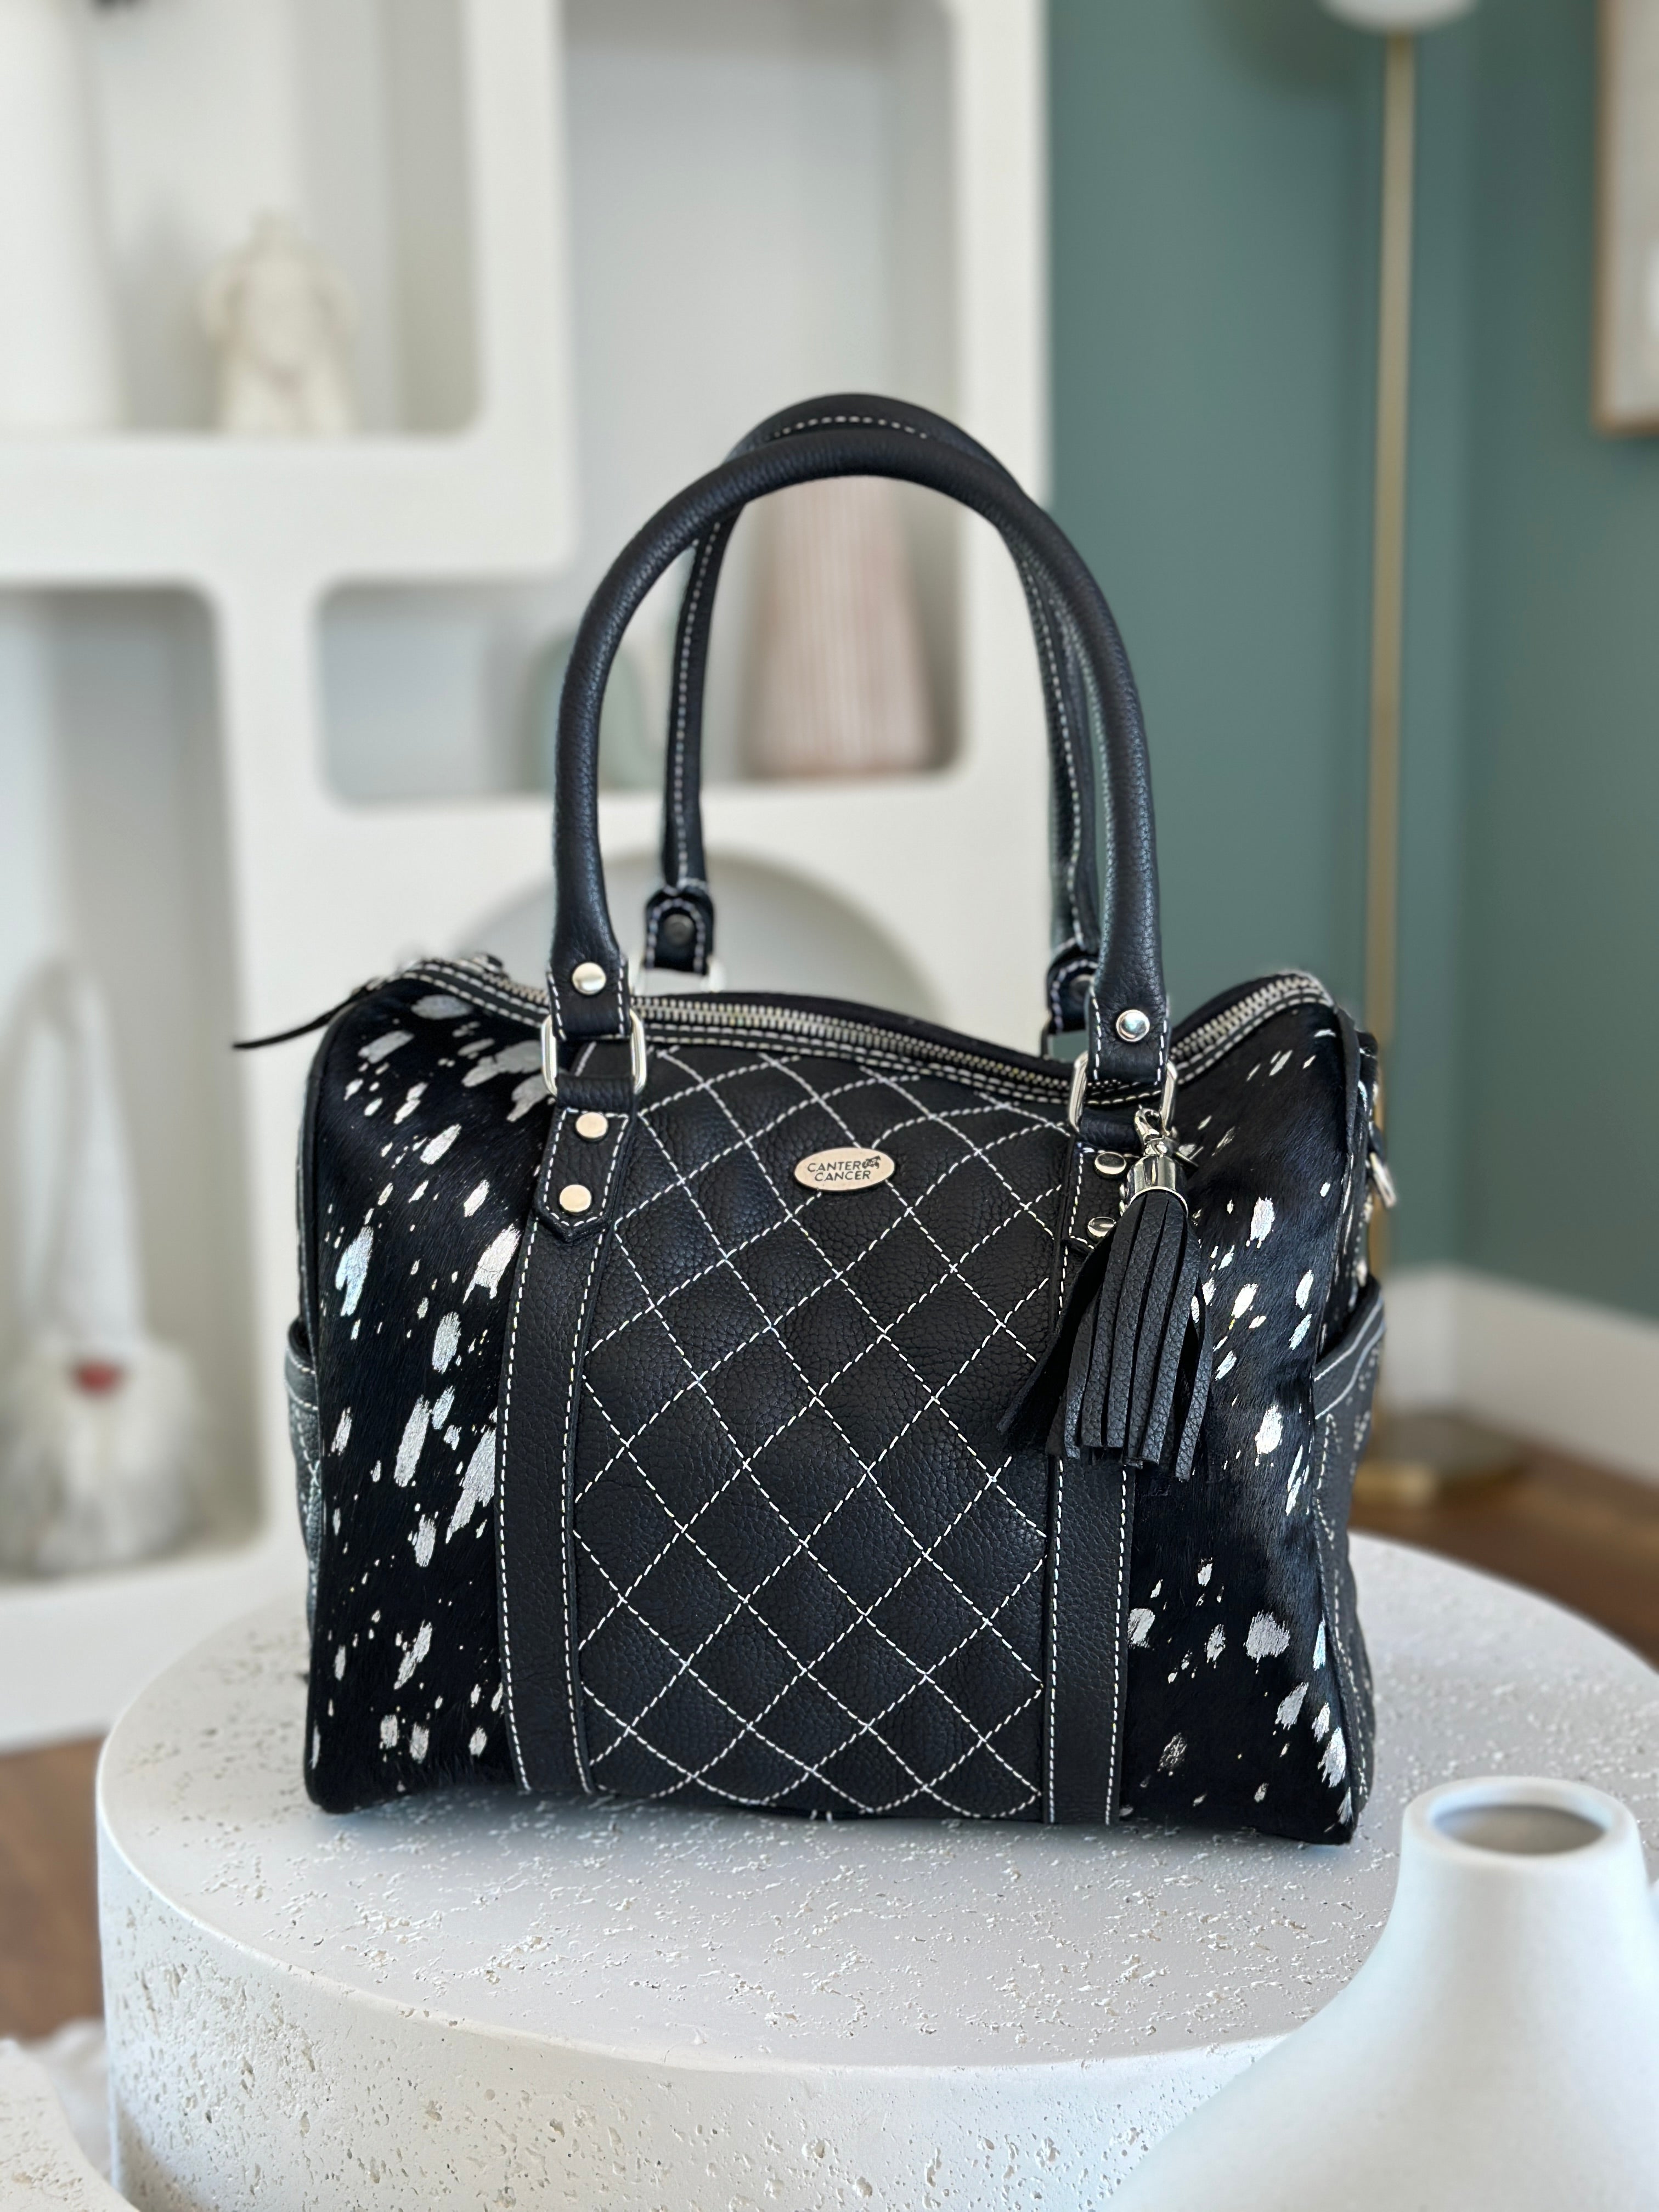 Silver Speckle Cowhide and Black Leather Handbag